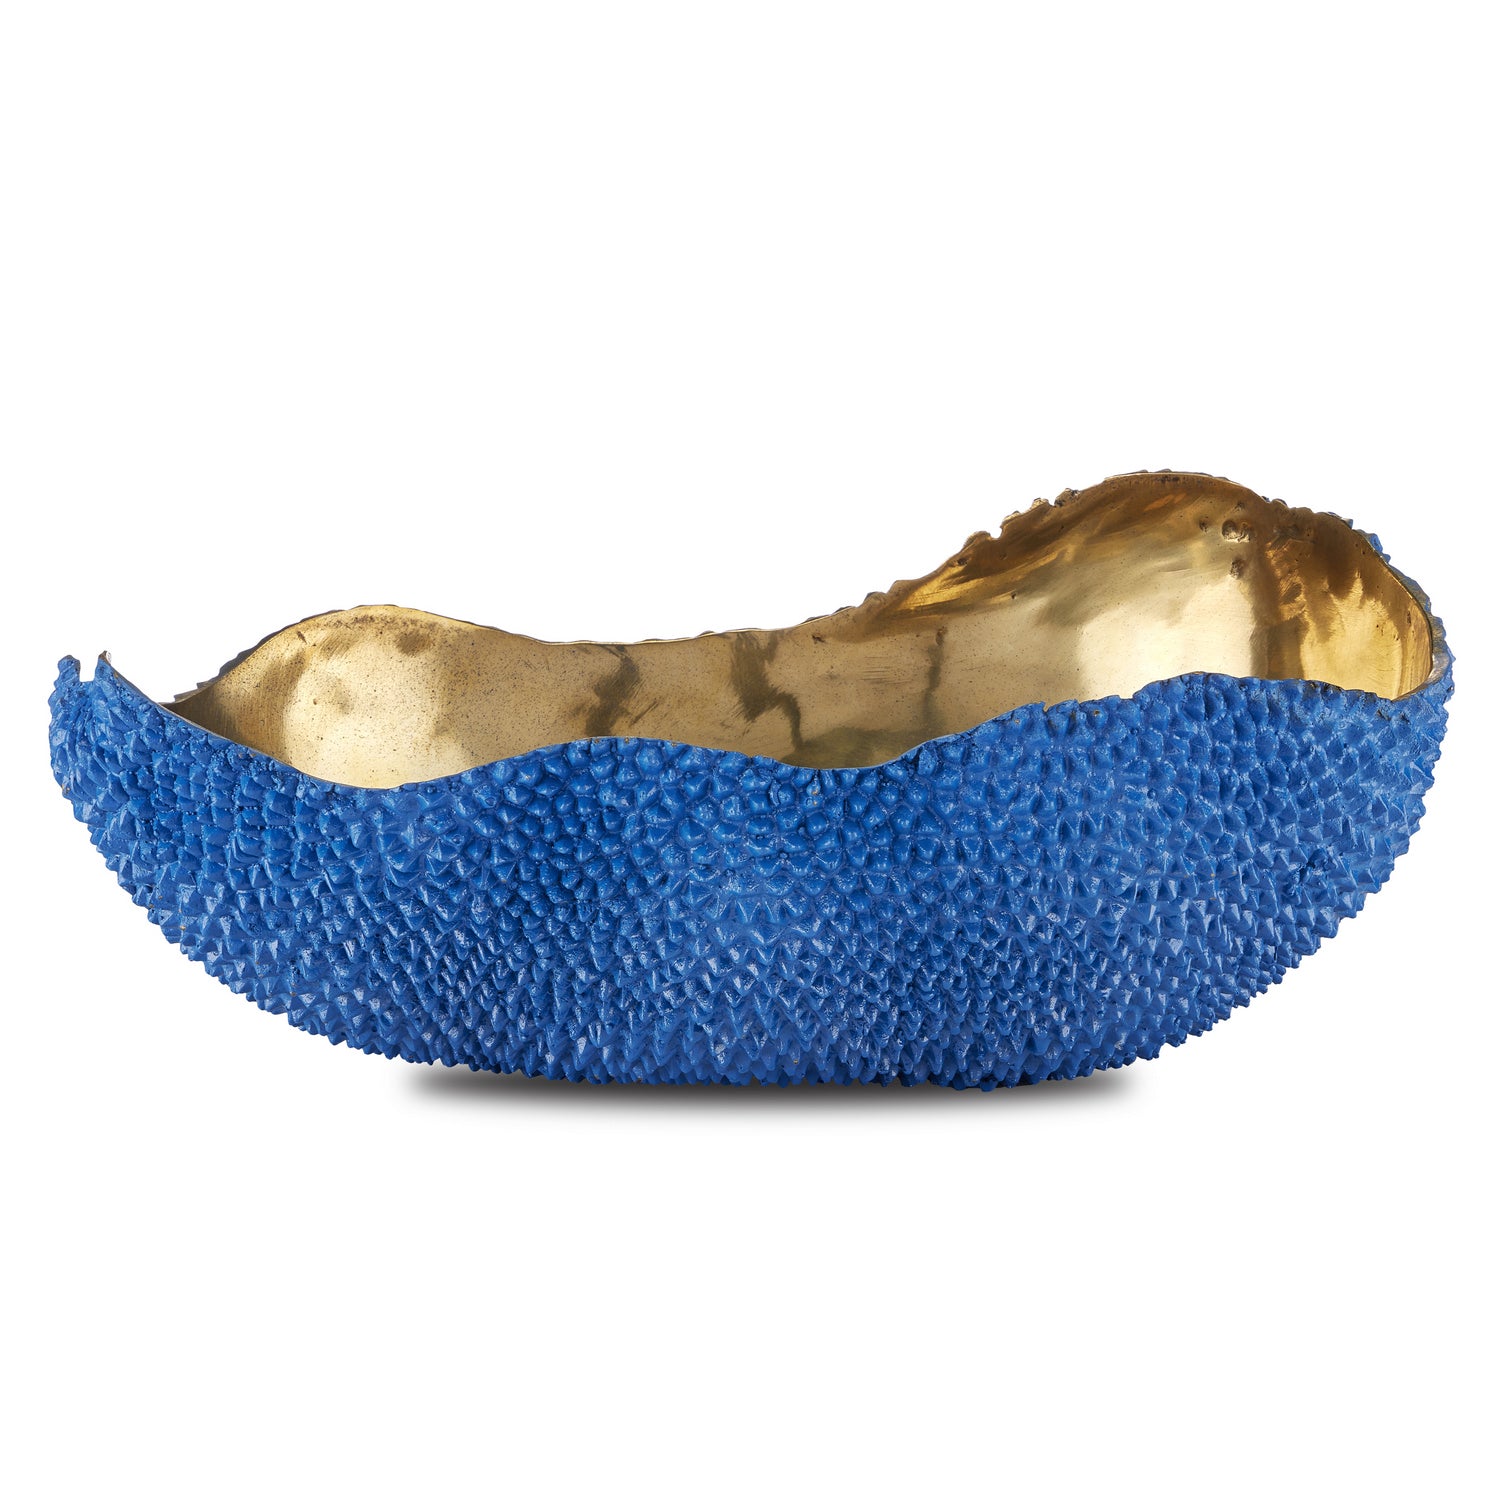 Currey and Company - 1200-0601 - Bowl - Jackfruit - Blue/Gold